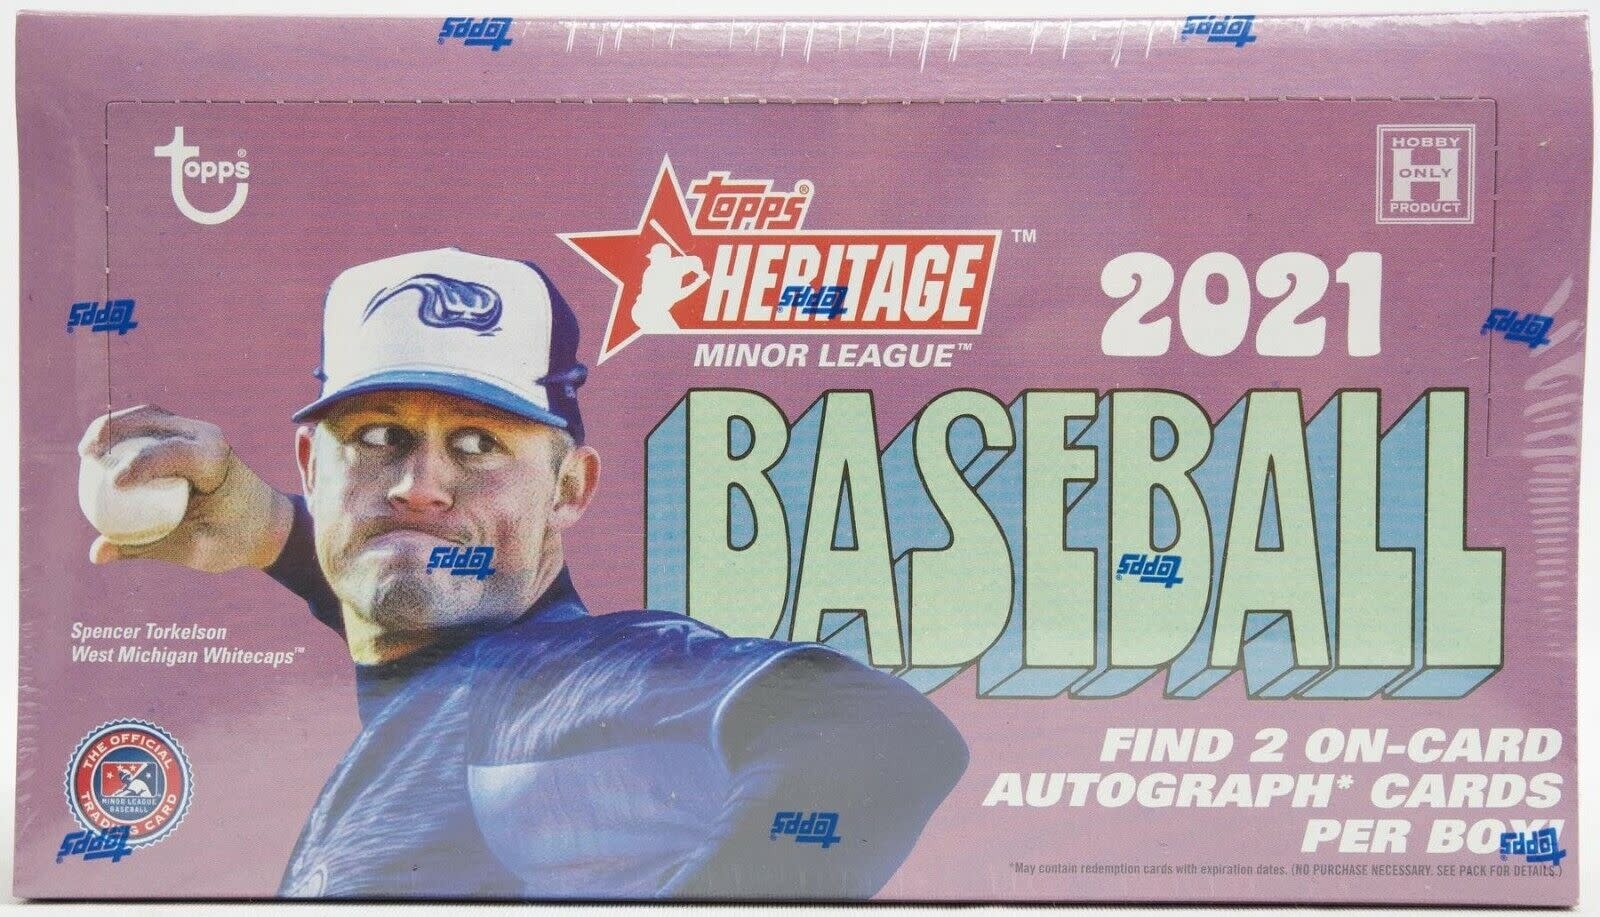 2021 TOPPS HERITAGE MINOR LEAGUE HOBBY BOX CanCentral Sports Cards